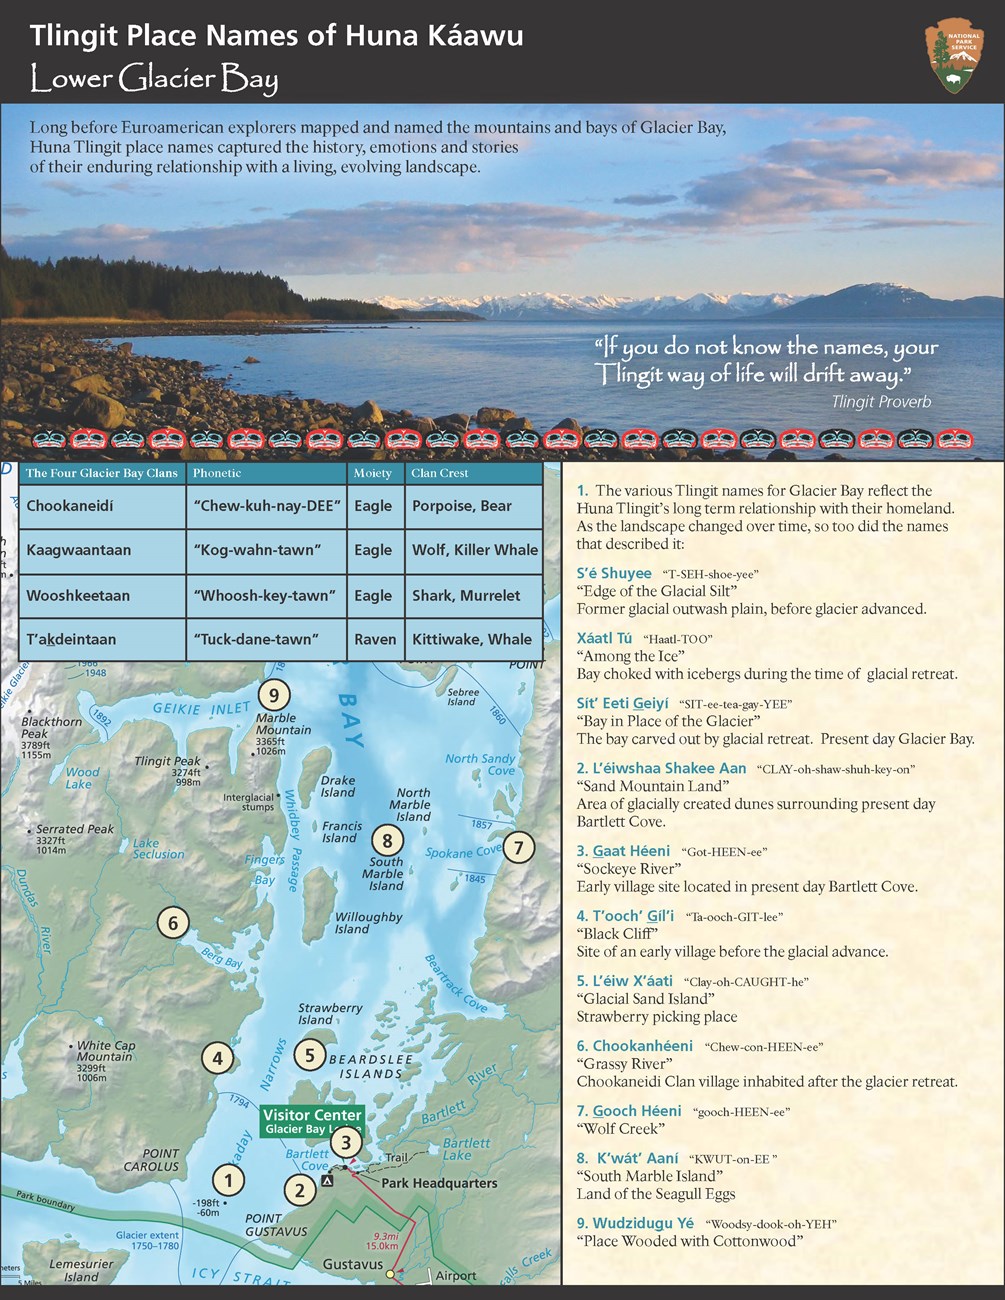 Tlingit Place names of Glacier Bay, page 1. Download pdf on this page for accessible version.